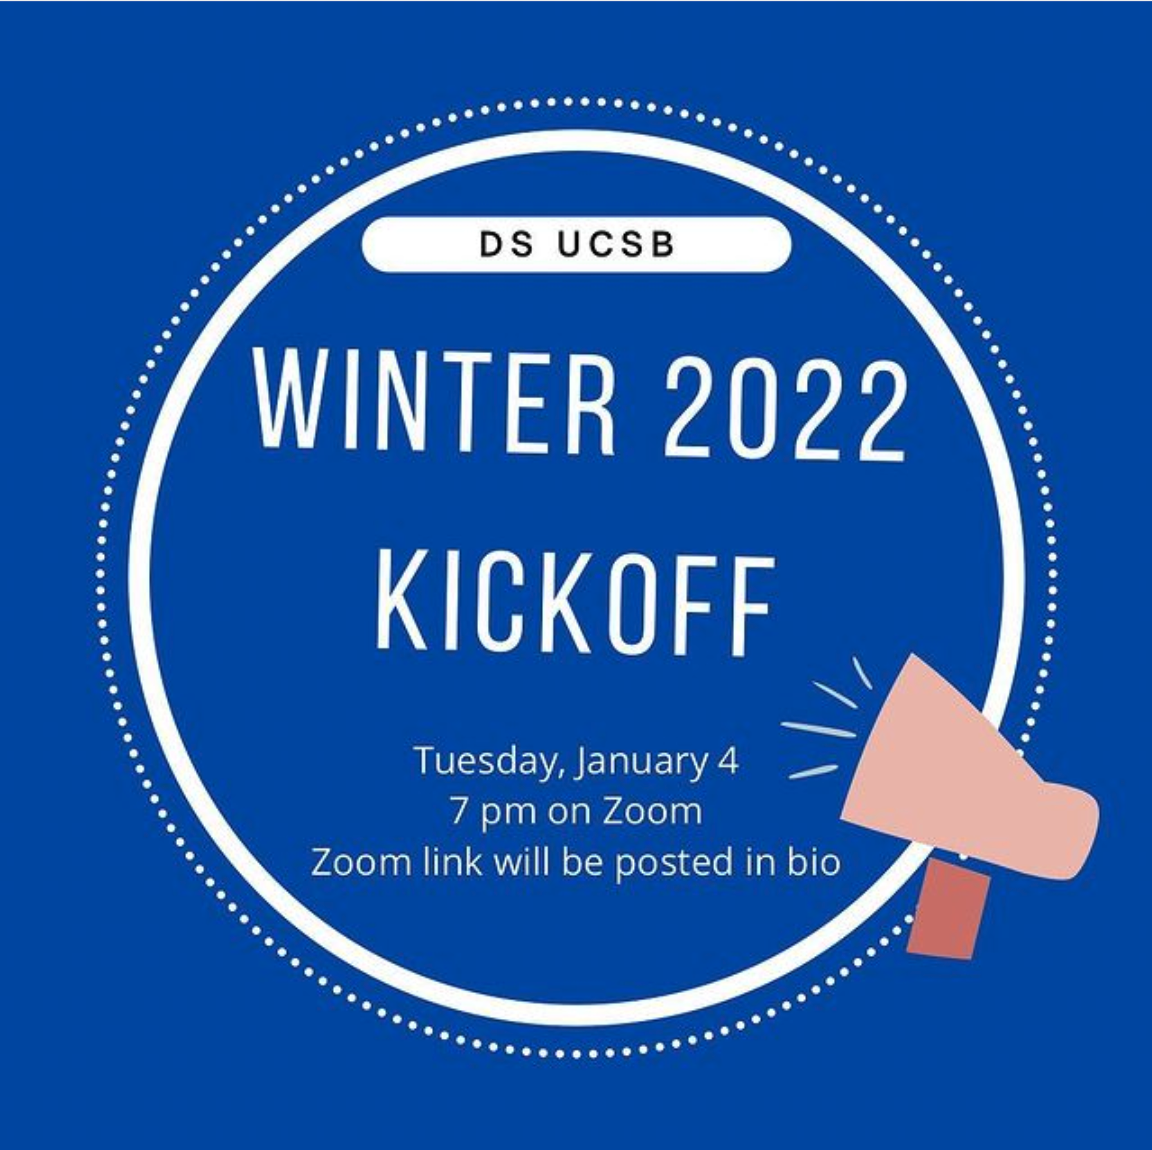 Data Science UCSB's Winter 2022 Kickoff